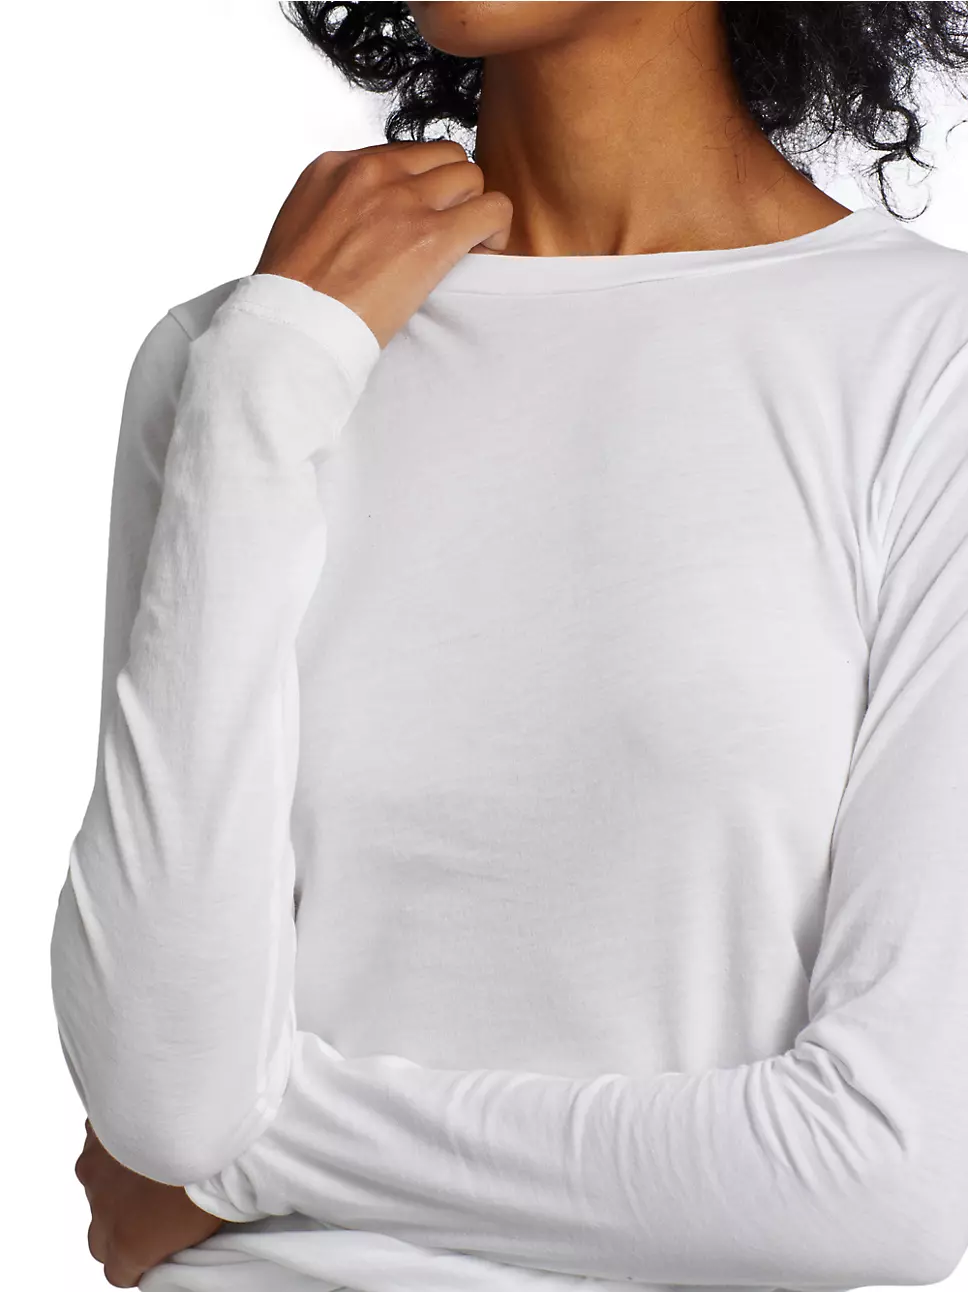 FITTED LONG SLEEVE T-SHIRT IN WHITE - Romi Boutique